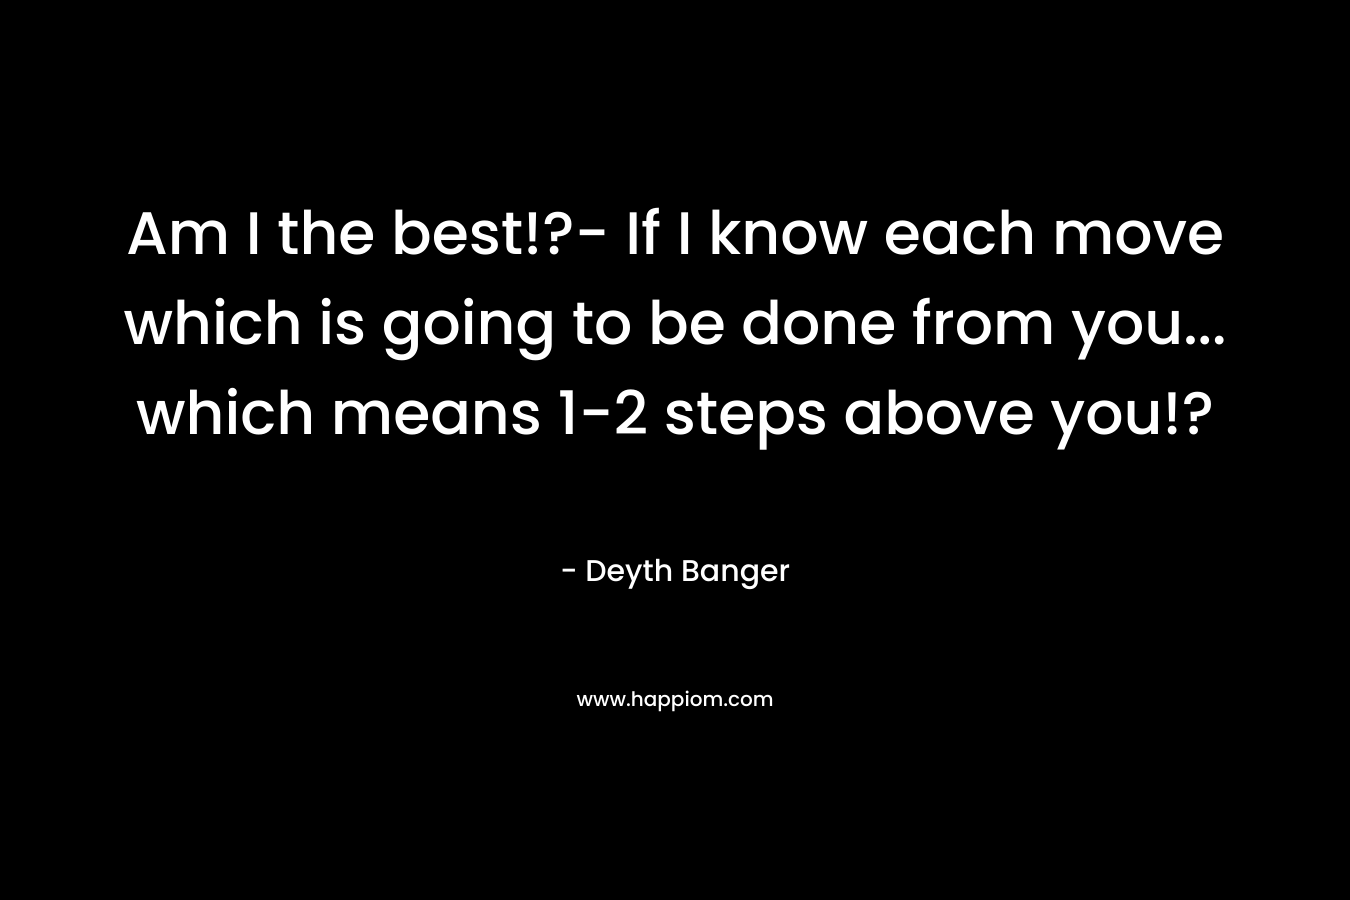 Am I the best!?- If I know each move which is going to be done from you… which means 1-2 steps above you!? – Deyth Banger